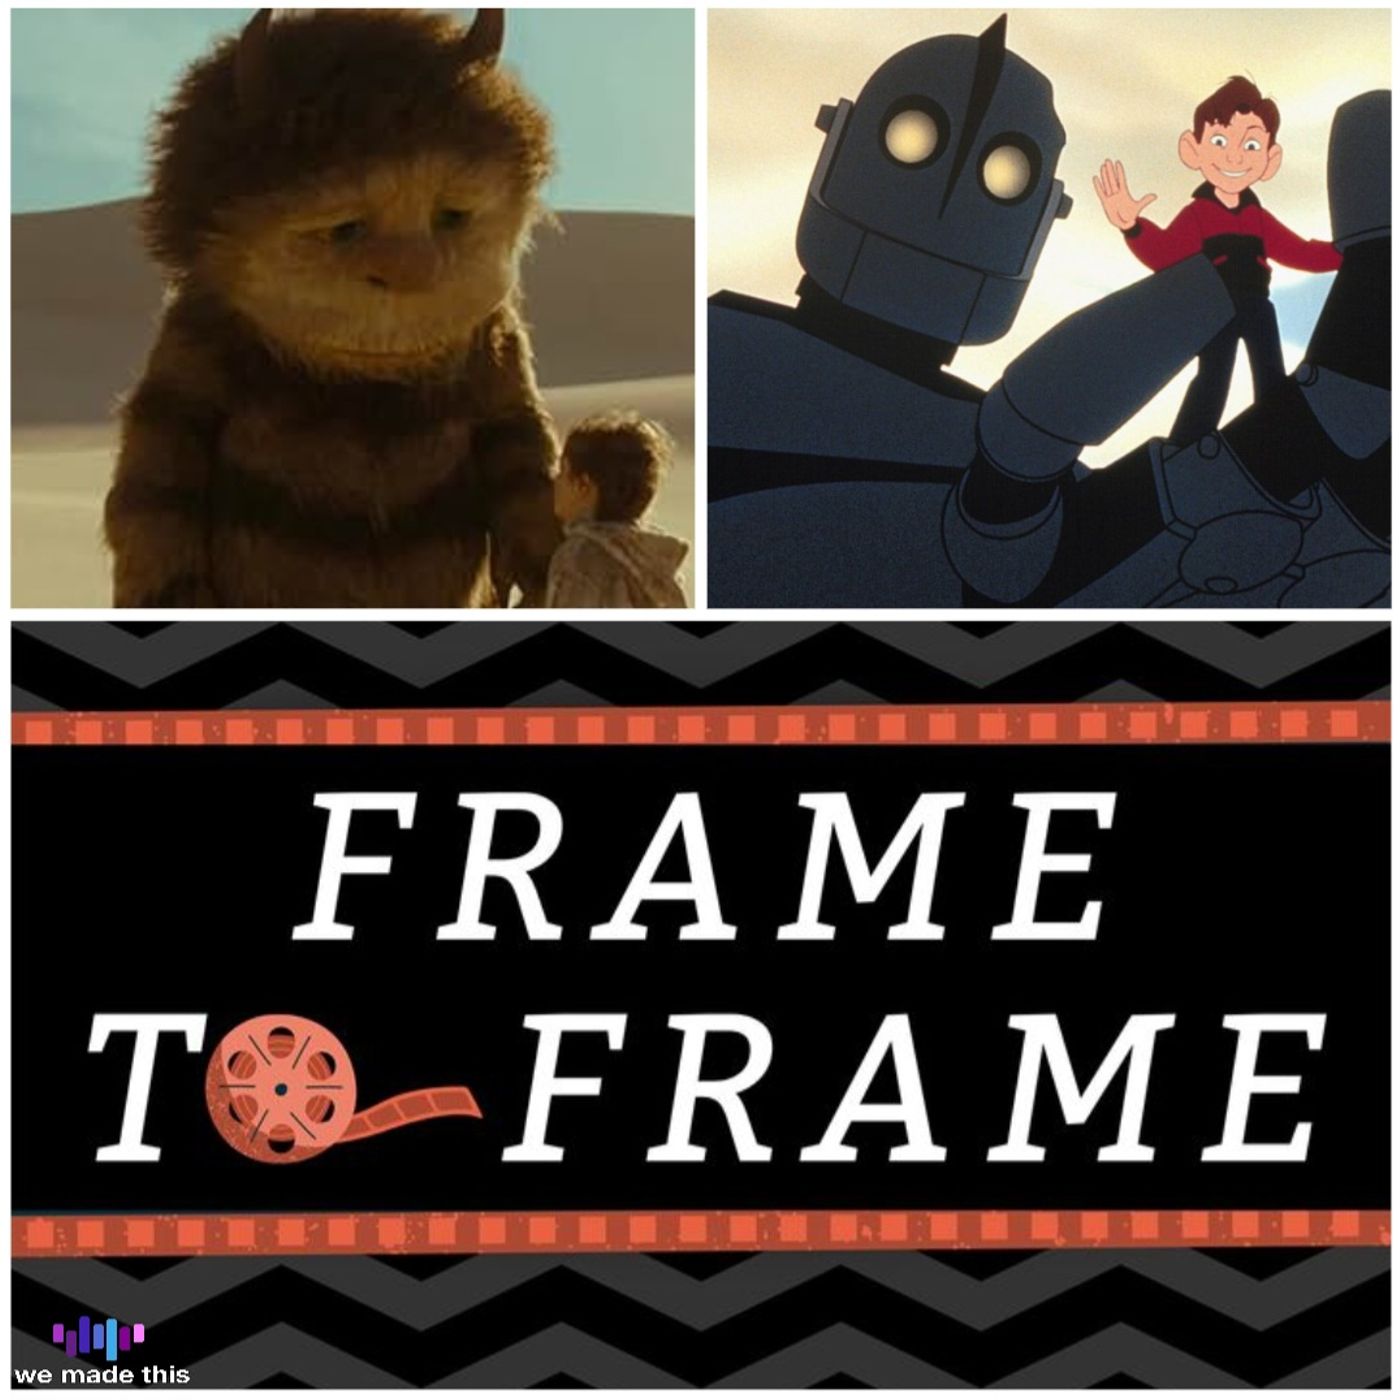 Episode 180 - The Iron Giant and Where The Wild Things Are